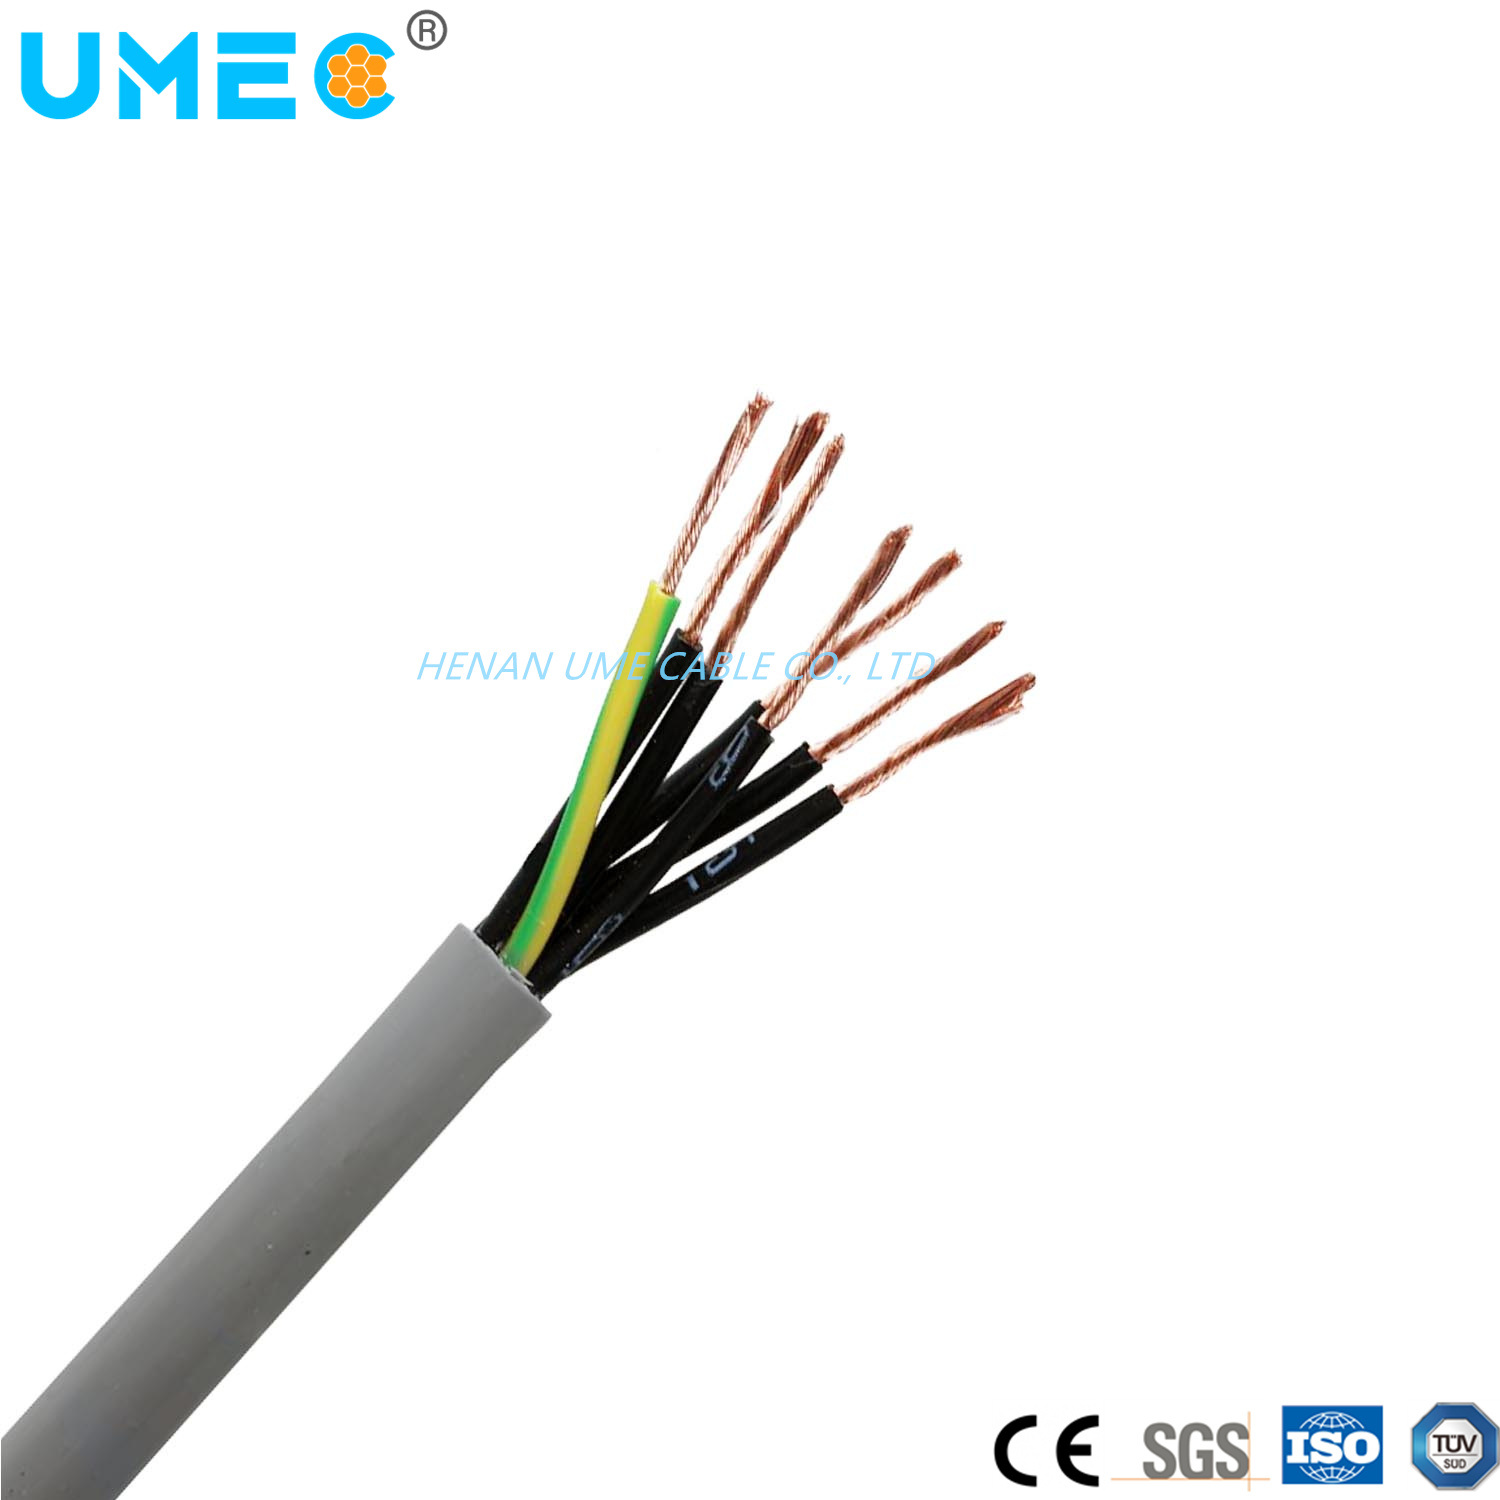 Ysly Control Cable 300/500V PVC Insulated Flexible Connection and Control Cable Yellow/Green Wire